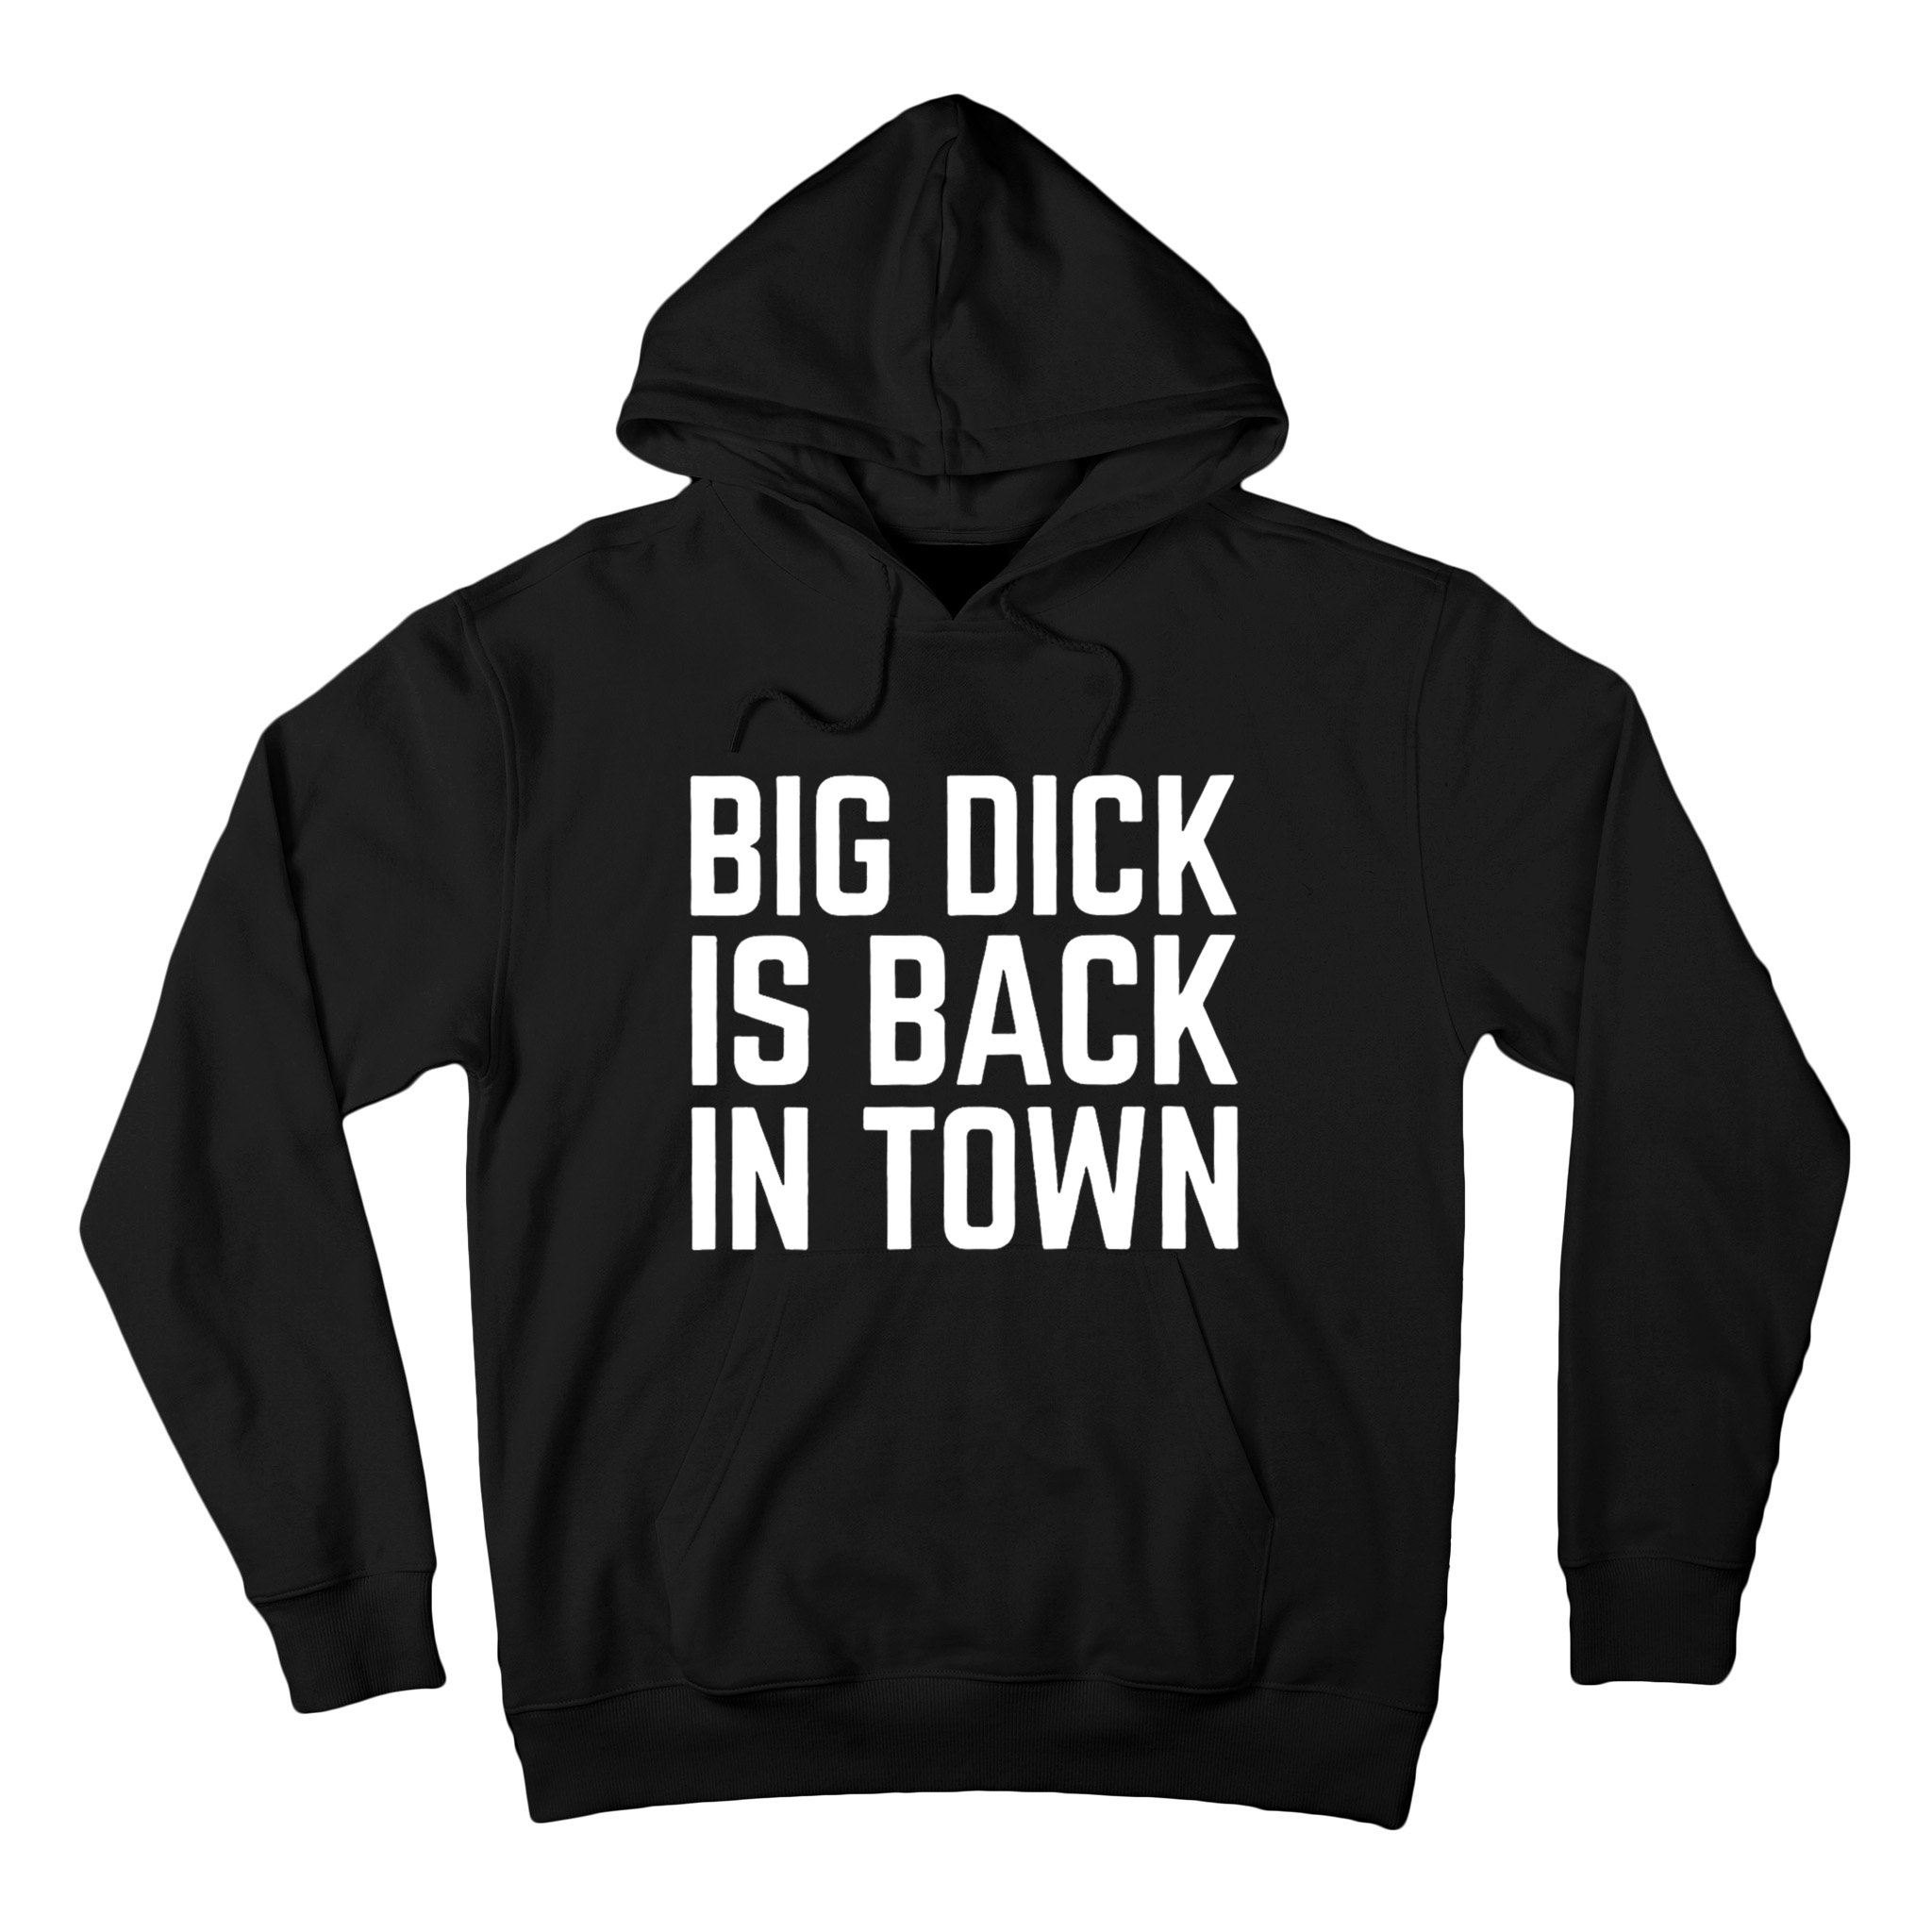 Big Dick Is Back In Town Funny Adult Sex Joke Gift Idea Hoodie TeeShirtPalace picture